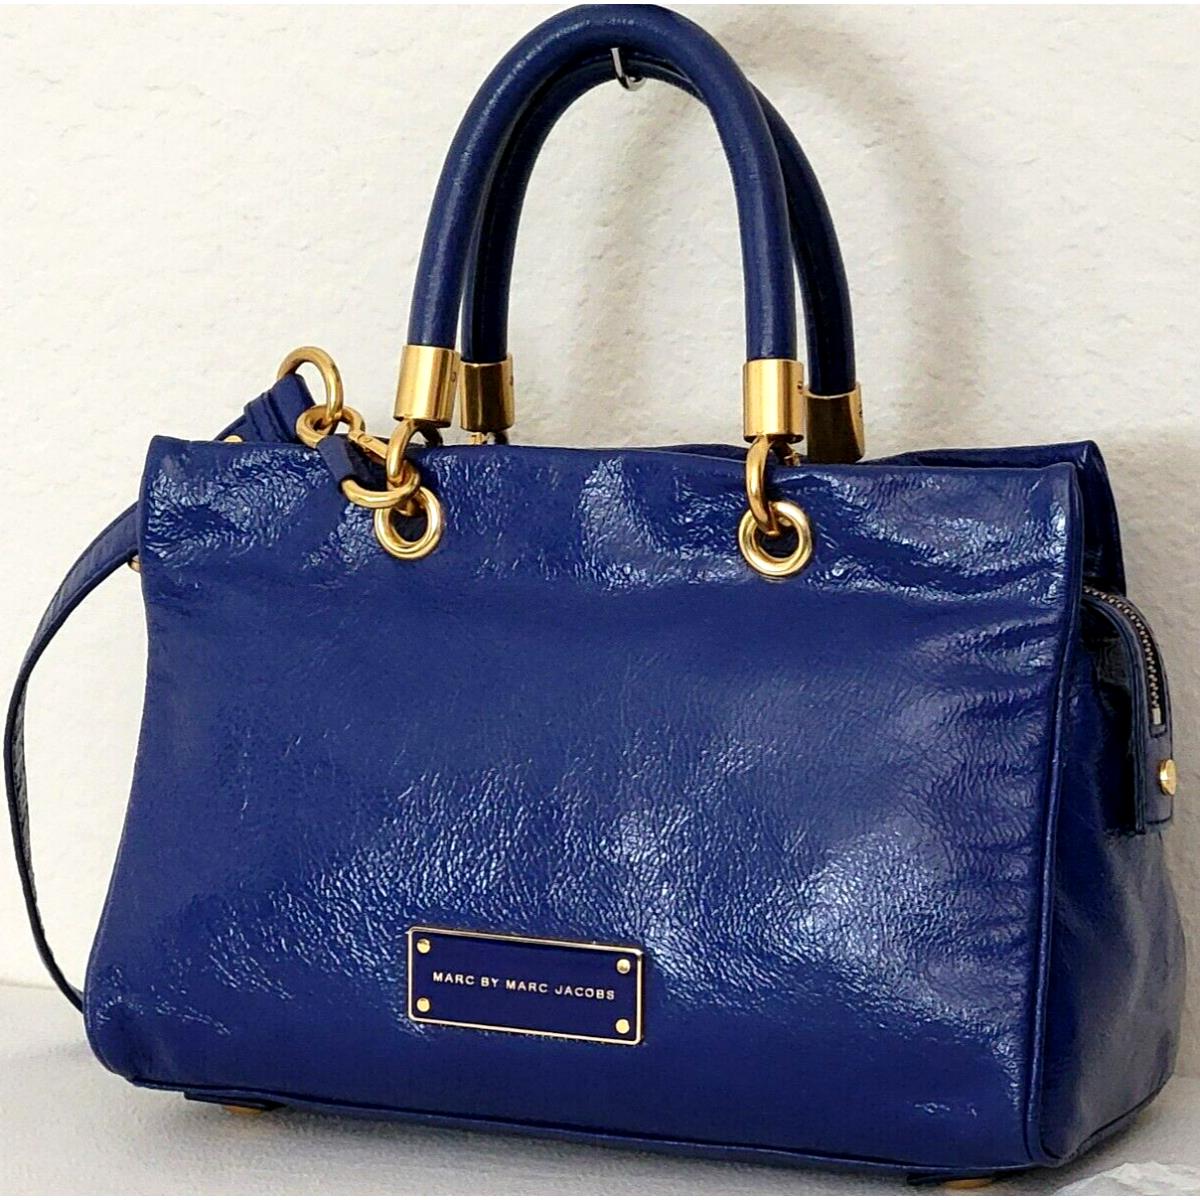 Marc Jacobs  bag  TOO HOT HANDLE - Blue Handle/Strap, Gold Hardware, BRIGHT ROYAL BLUE Exterior 3